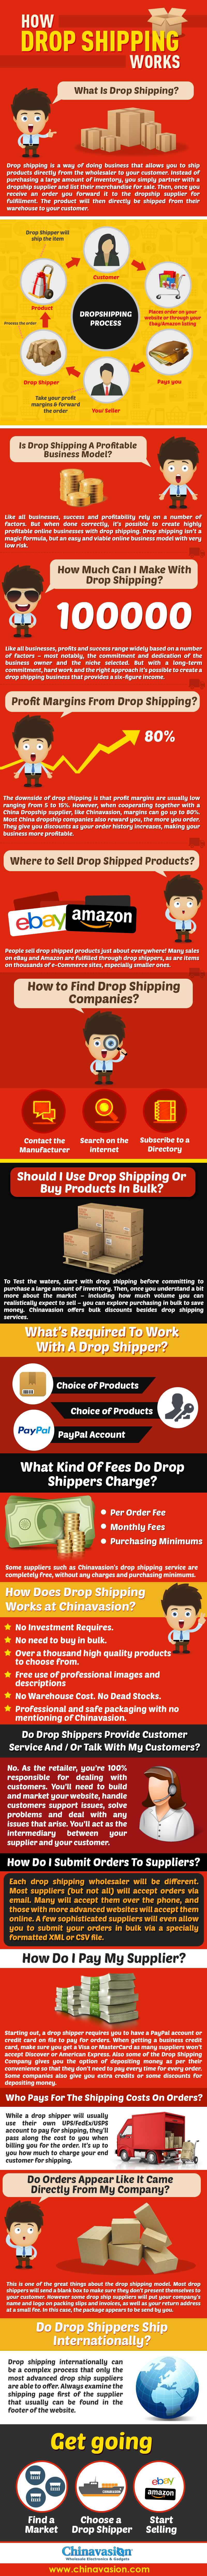 How Drop Shipping Works